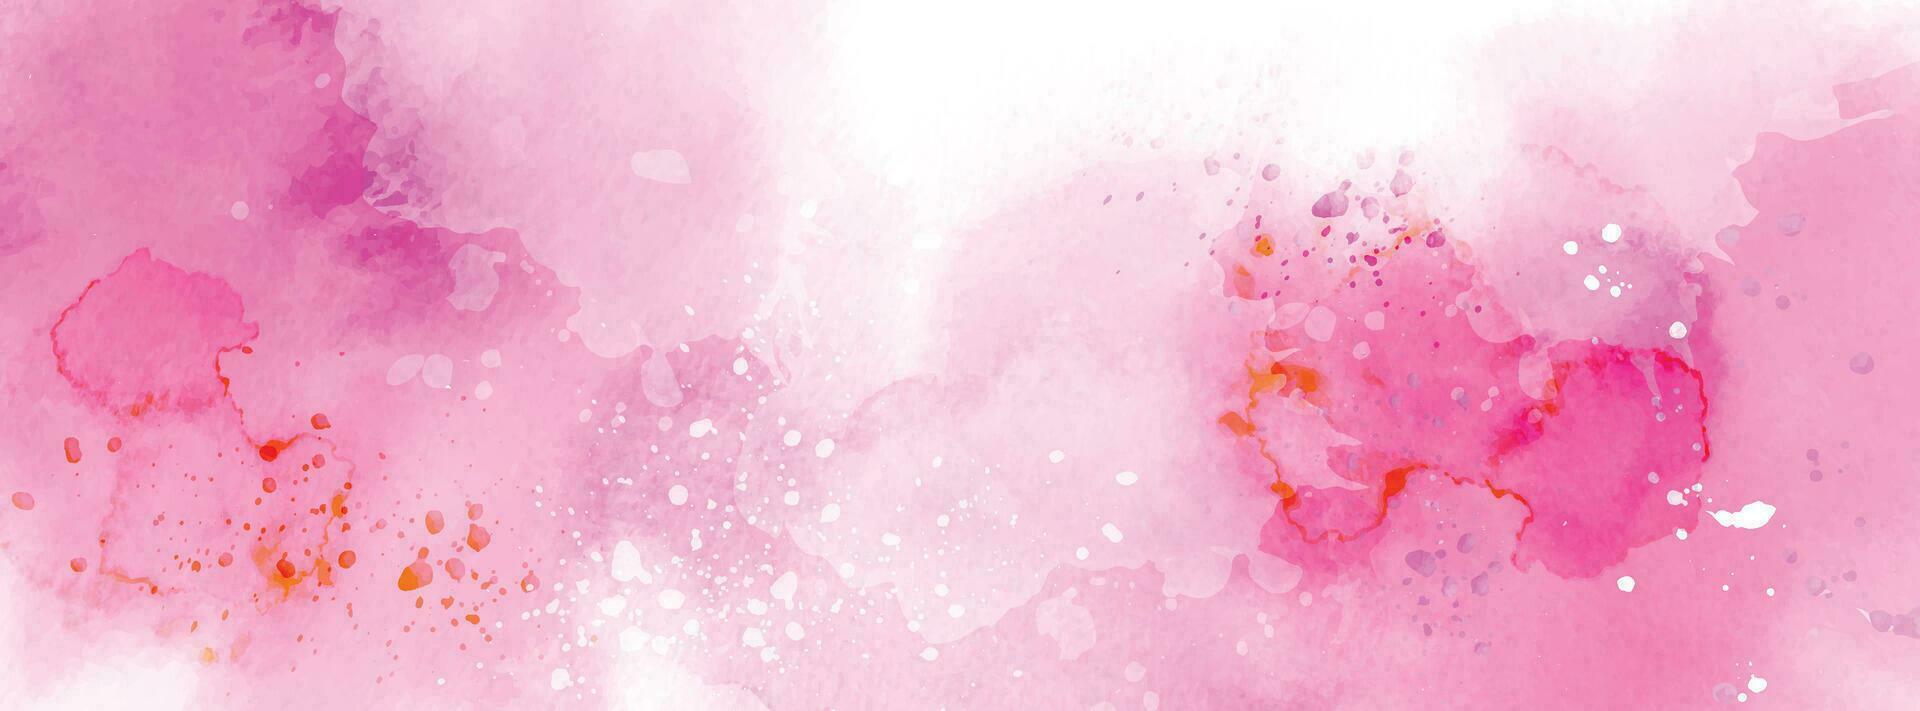 Abstract surface pink of splash watercolor vector